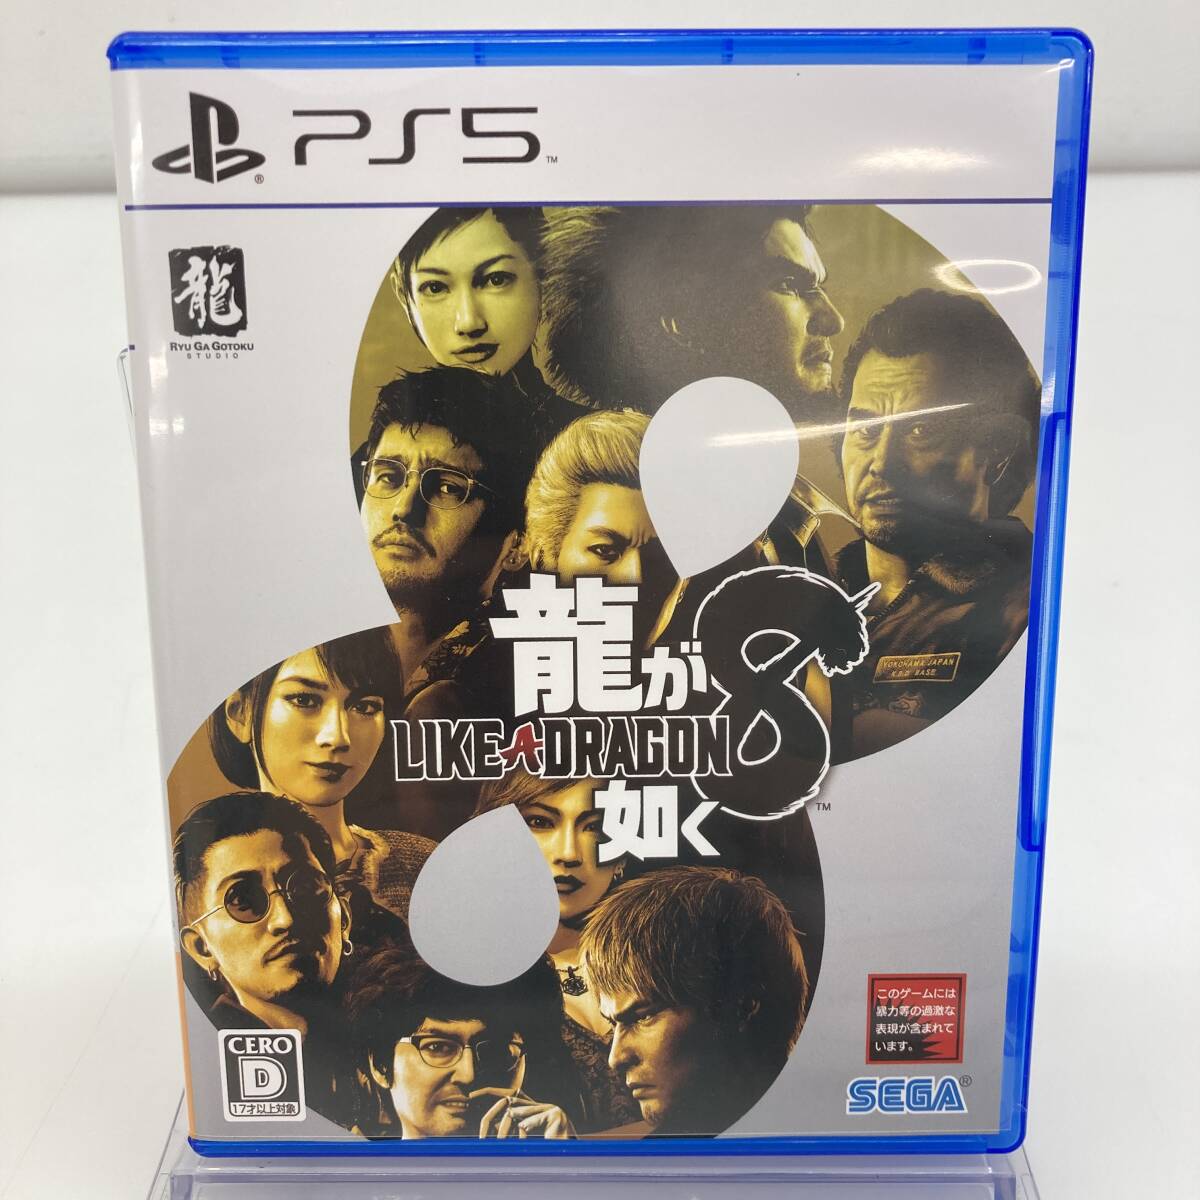 T No.4772 ★1円～【PS5 ソフト】プレイステーション5 PlayStation5 ソフト 龍が如く8 中古品 ◎レターパック発送可◎の画像1